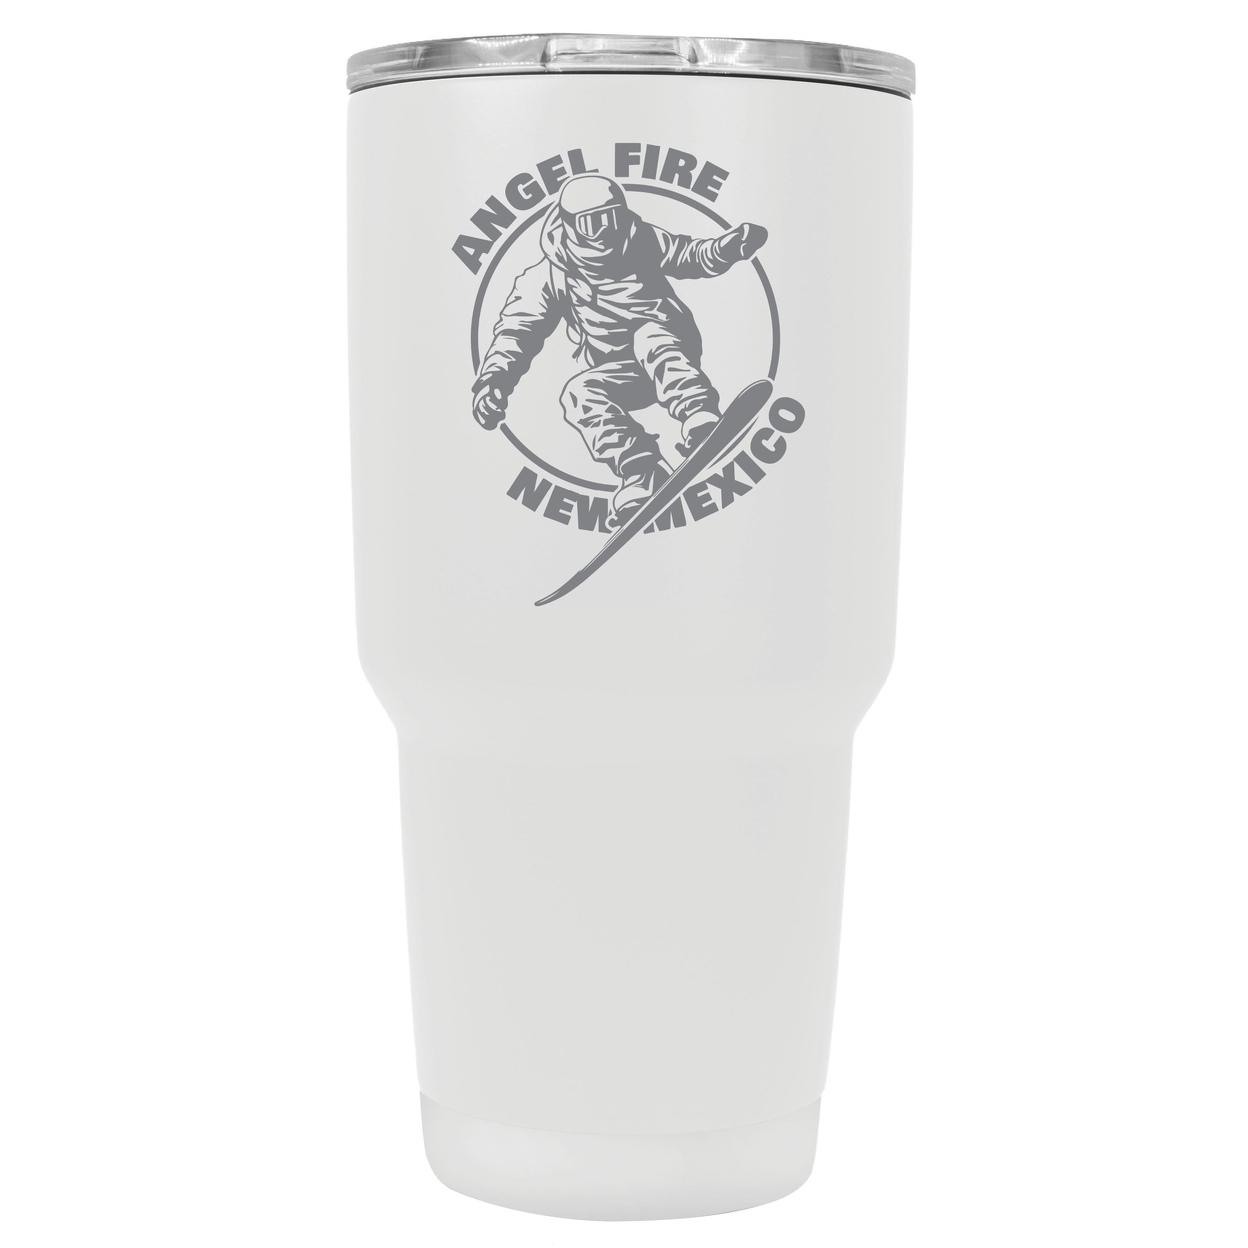 Angel Fire New Mexico Souvenir 24 Oz Engraved Insulated Stainless Steel Tumbler - Navy,,4-Pack